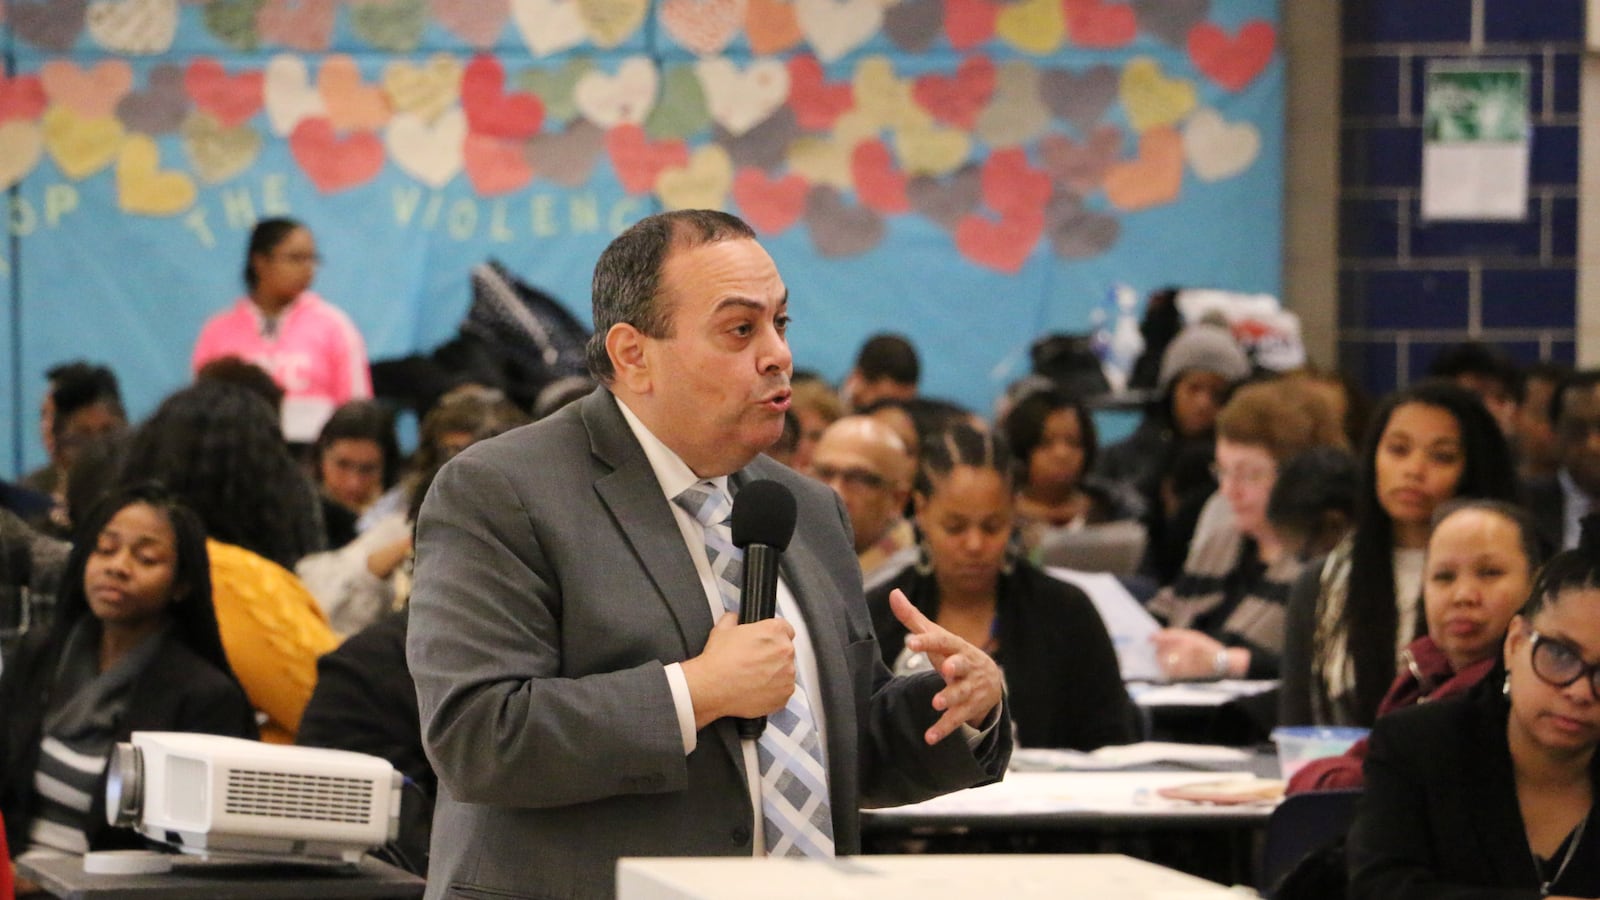 Superintendent Roger León unveiled his strategy to improve the district at Central High School on Wednesday, January 16, 2019.